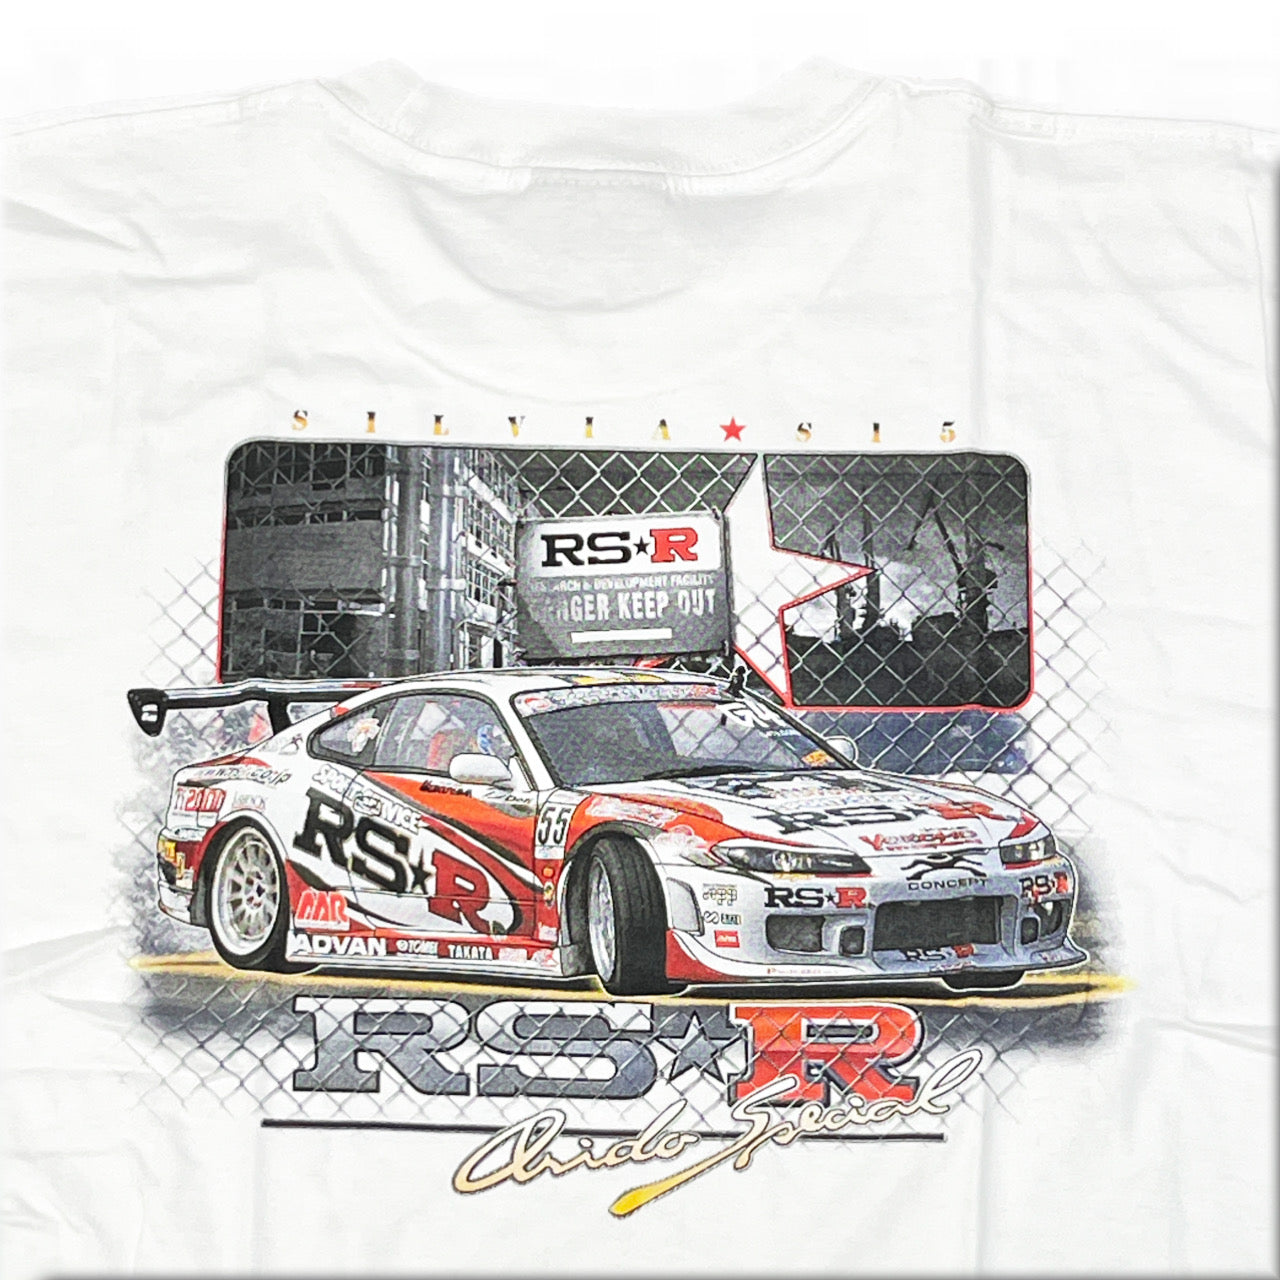 Nissan RS-R S15 Max Orido Special D1GP T-shirt White